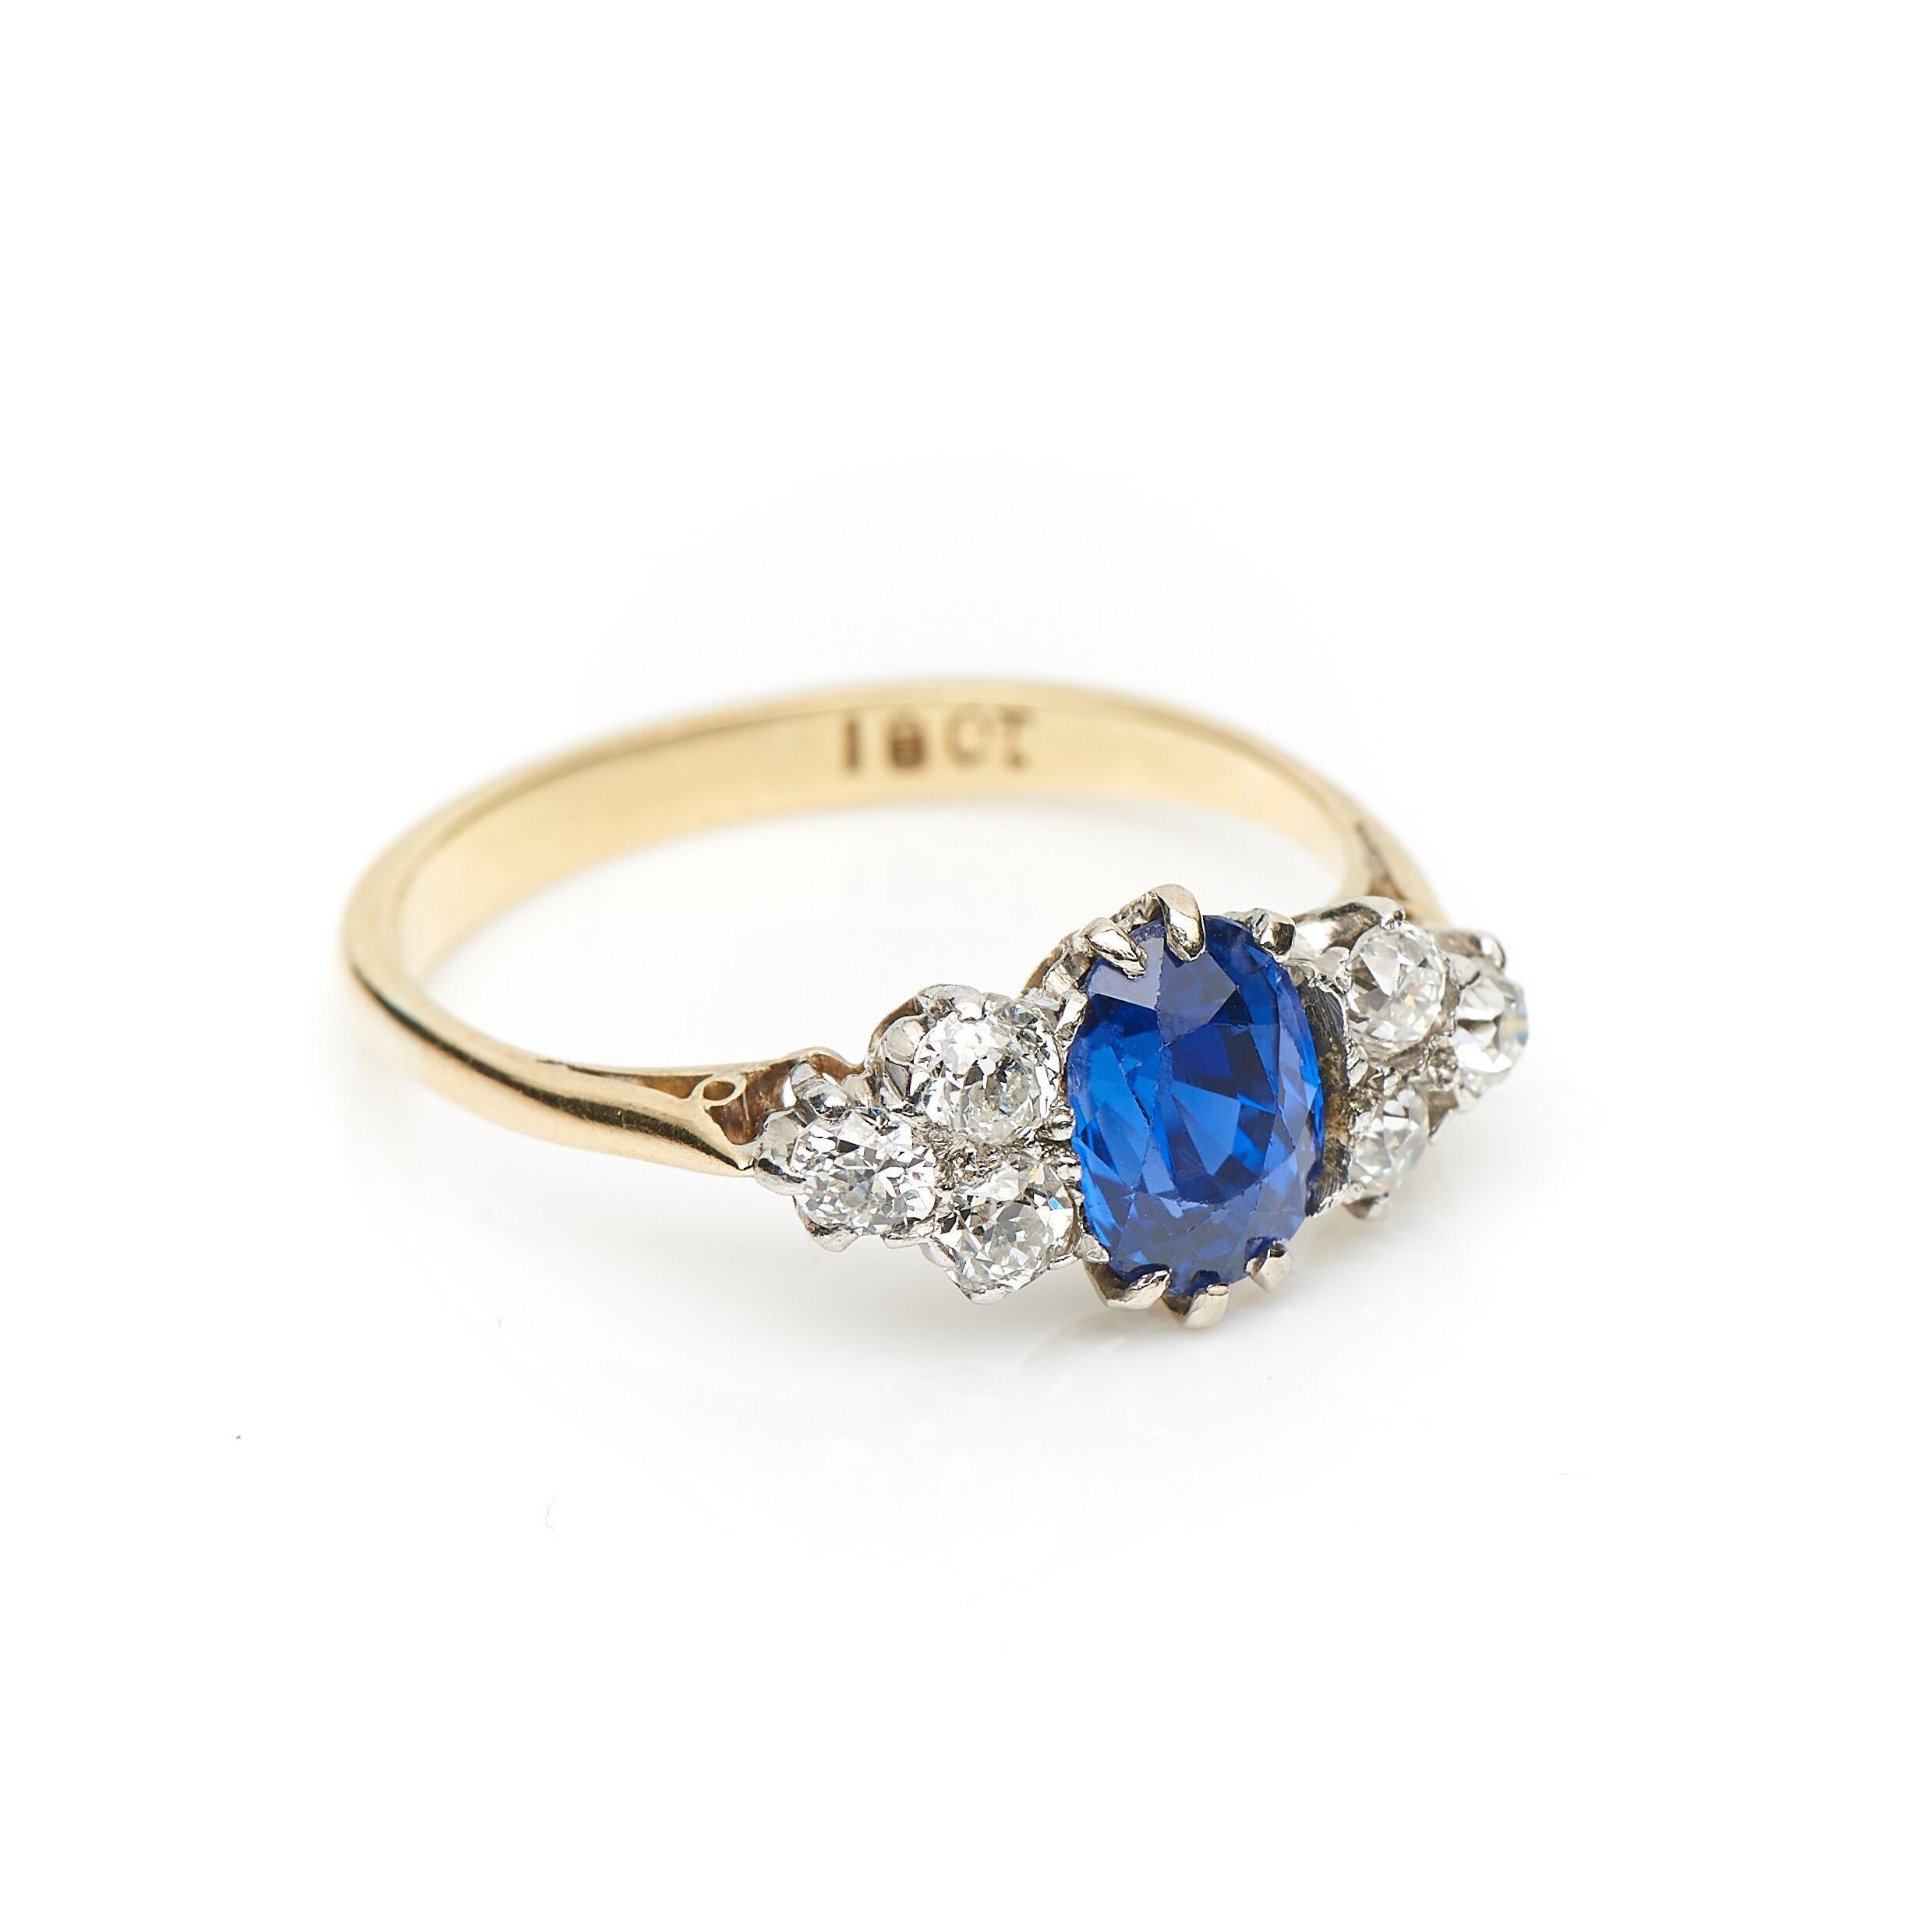 Victorian, sapphire and diamond ring, circa 1880. Set to centre an oval sapphire displaying an electric play of blue tones with a cluster of old cut diamonds on each shoulder. This is simply a beautiful sapphire; it’s depth of colour makes it a